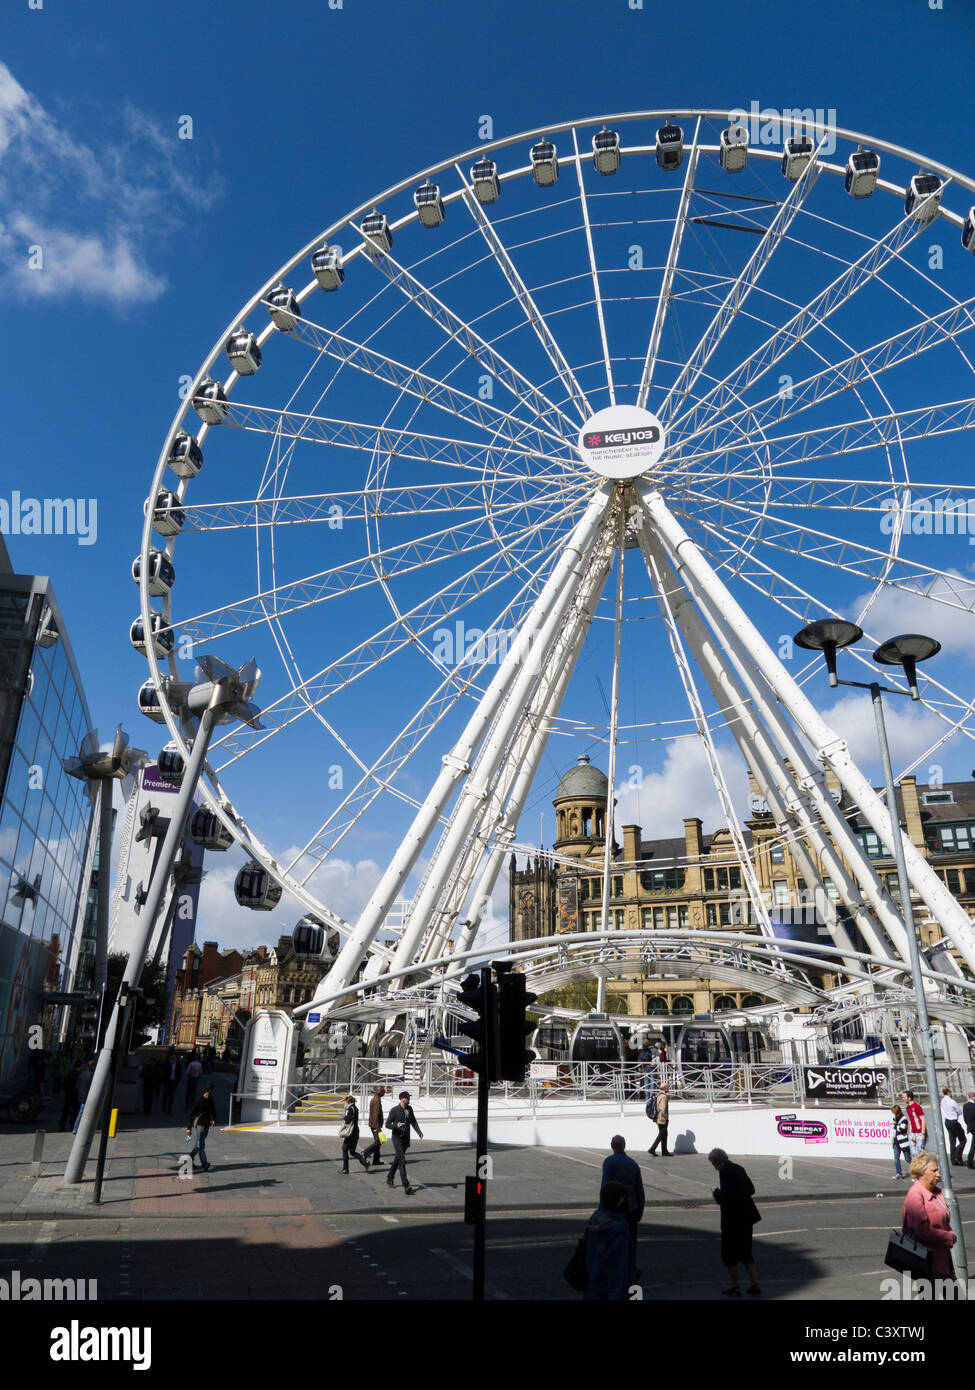 Manchester Wheel, Exchange Square, Manchester Stock Photo